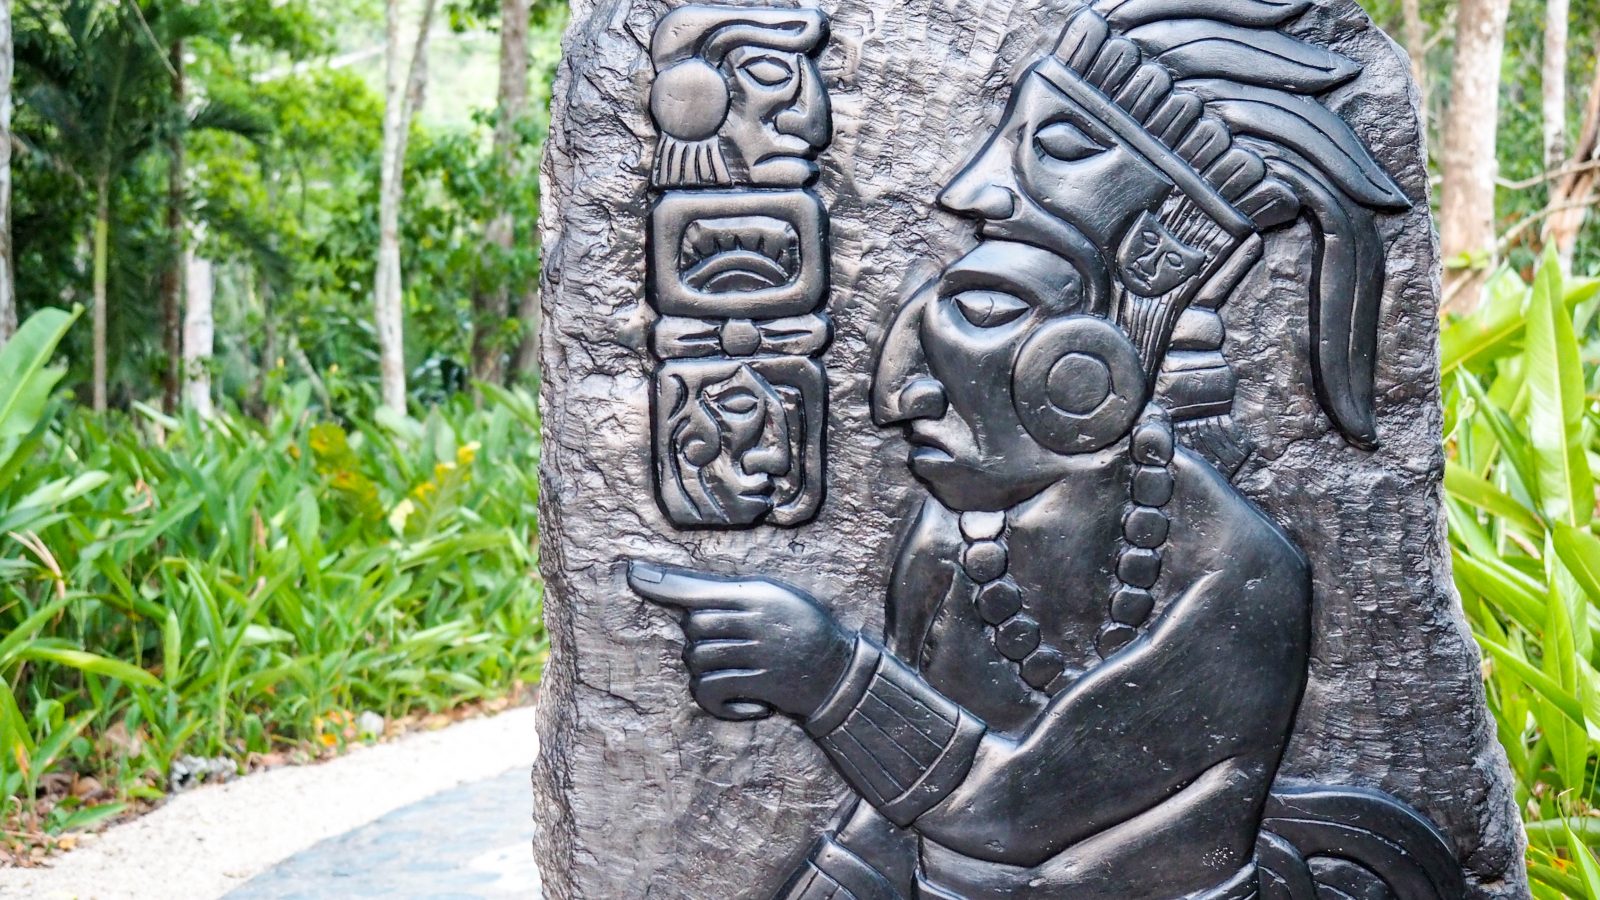 slate carving with maya figures and symbols in belize